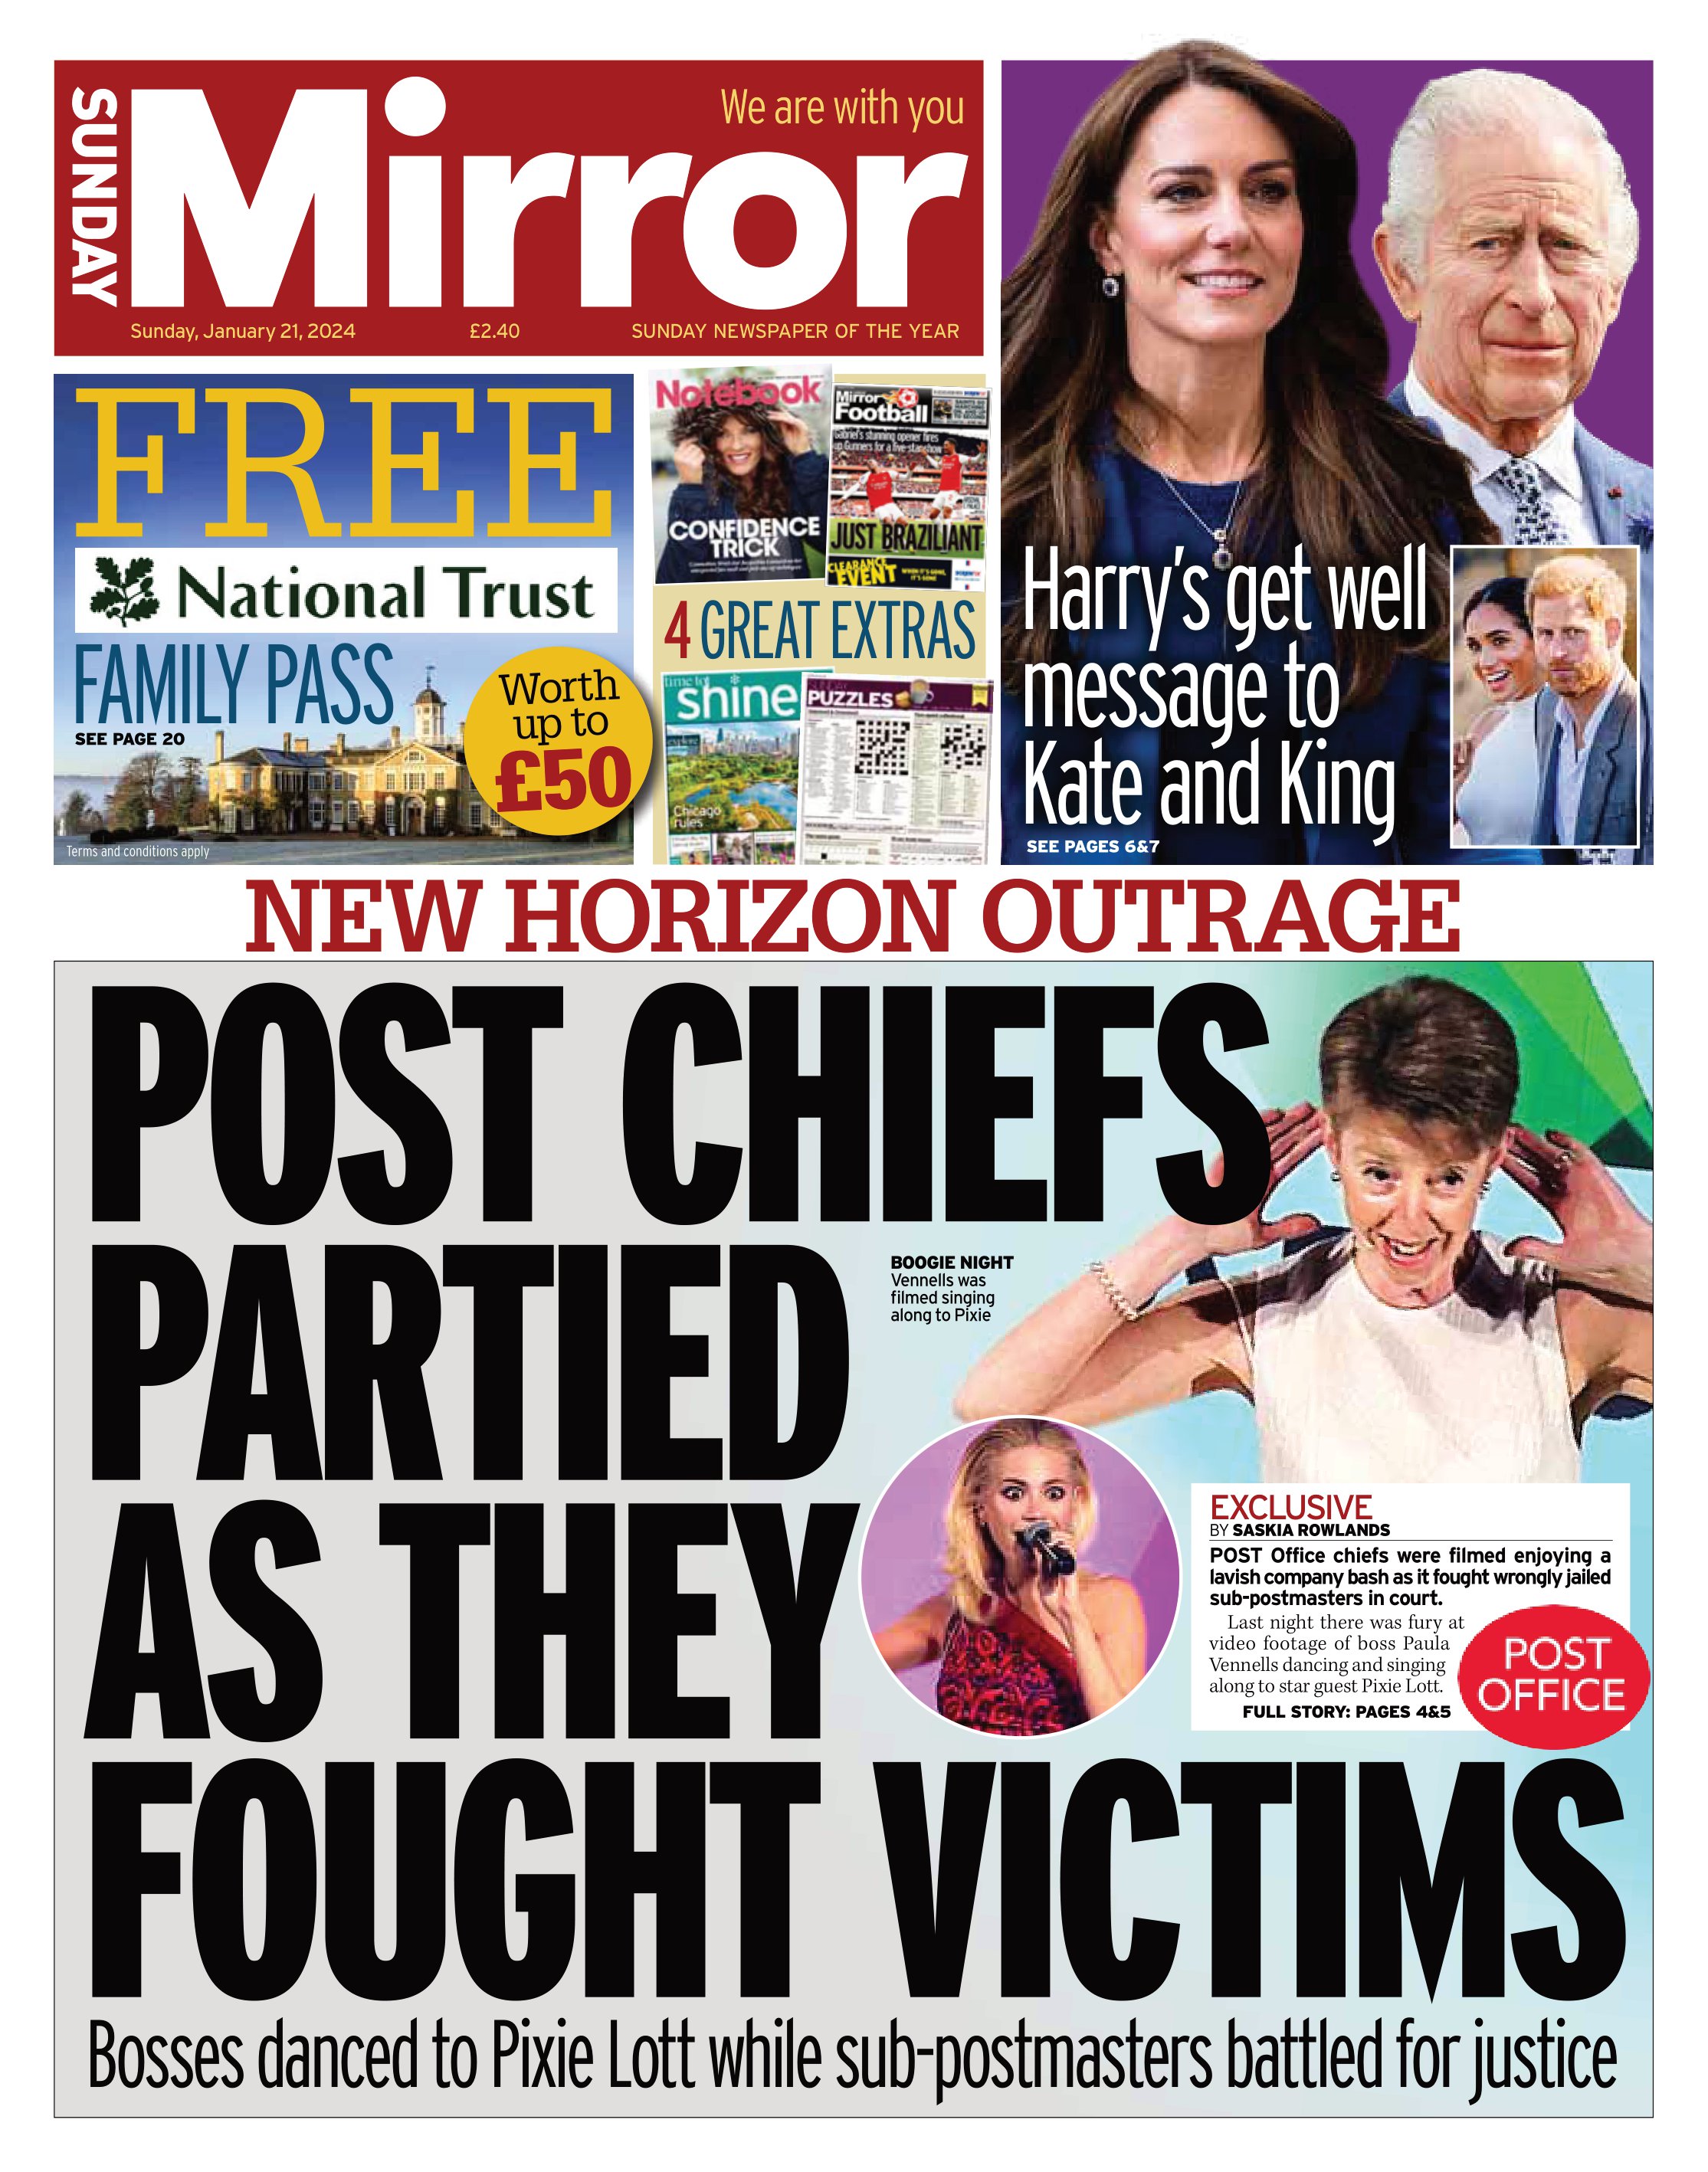 -Sunday's front page: Post chiefs partied as they fought victims #TomorrowsPapersToday
